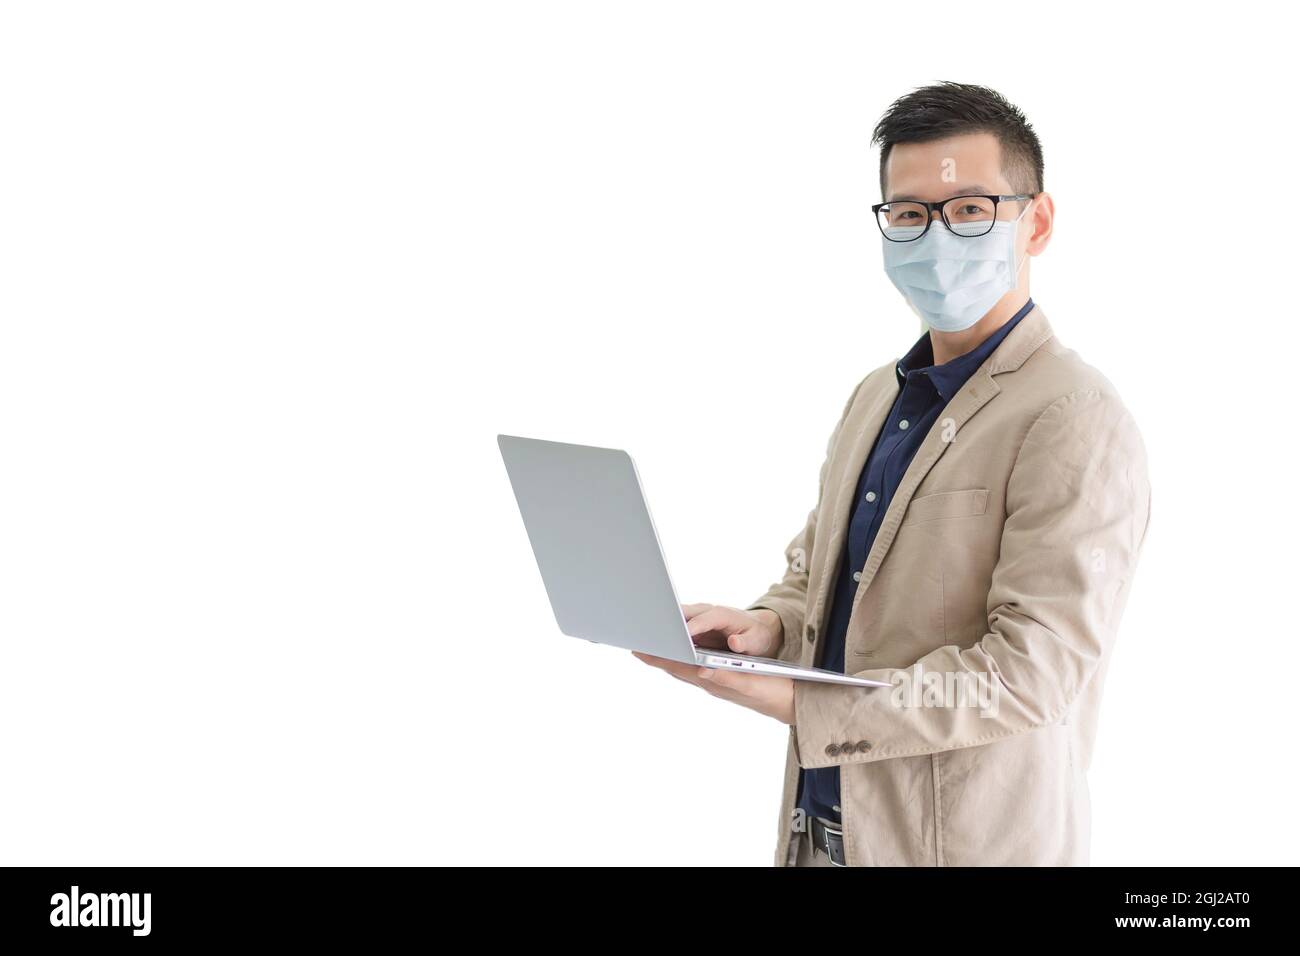 Business employees wearing hygienic mask holding smart computer isolate on white background with copy space. Stock Photo